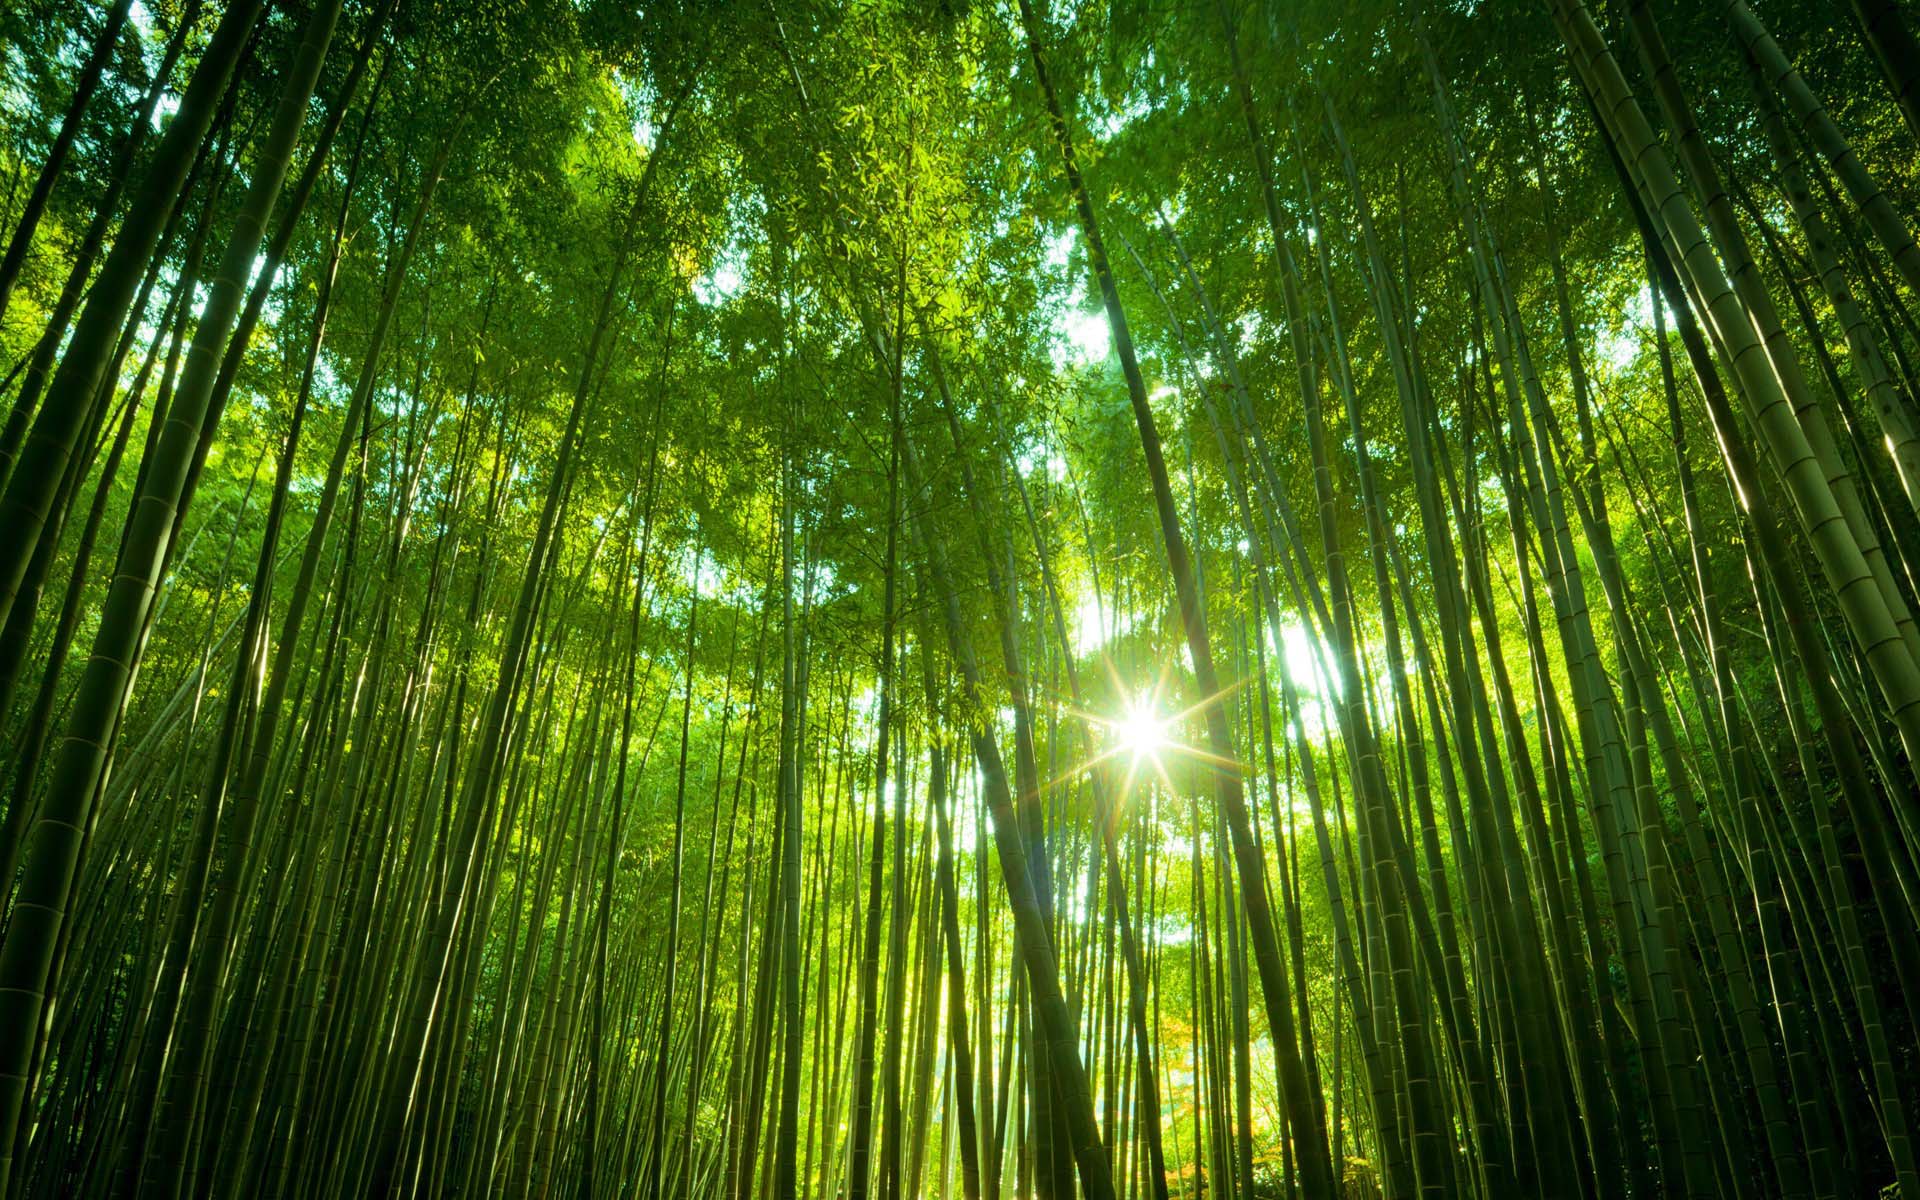 Bamboo forest 1920×1200 wallpaper 1920×1200 wallpaper picture